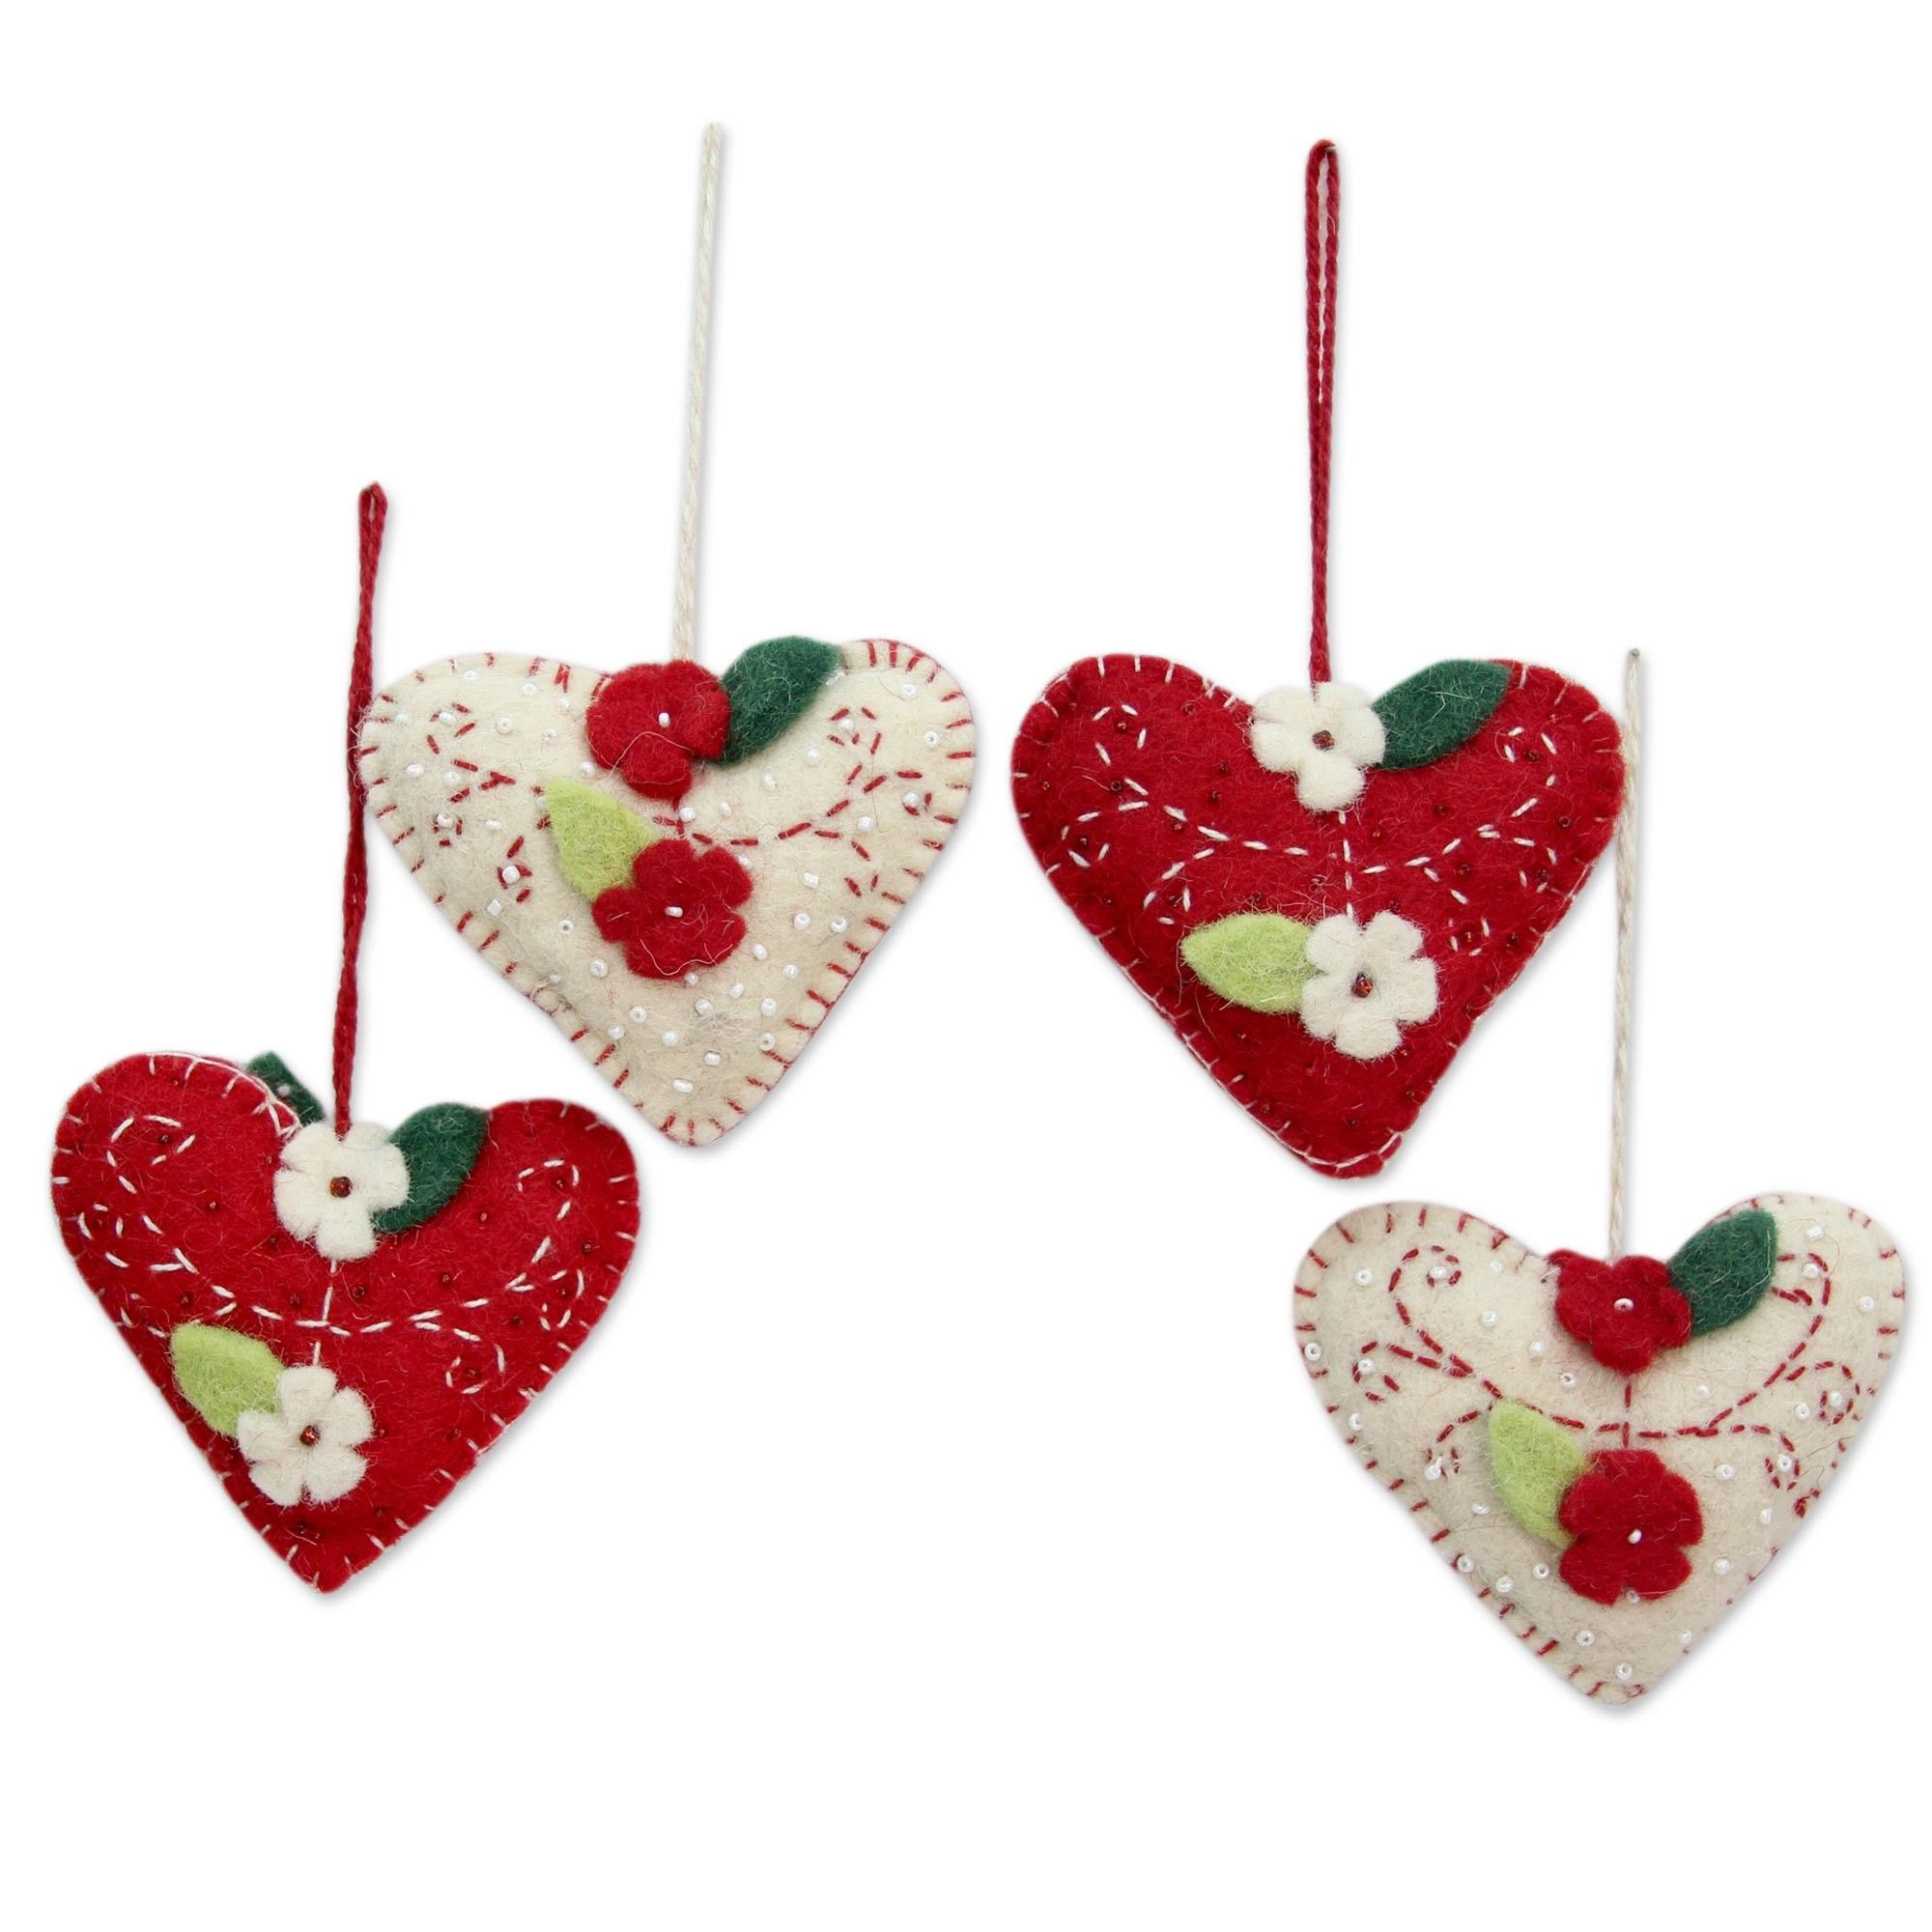 Felt Heart Ornament | Color red, Heart ornament and Pouches